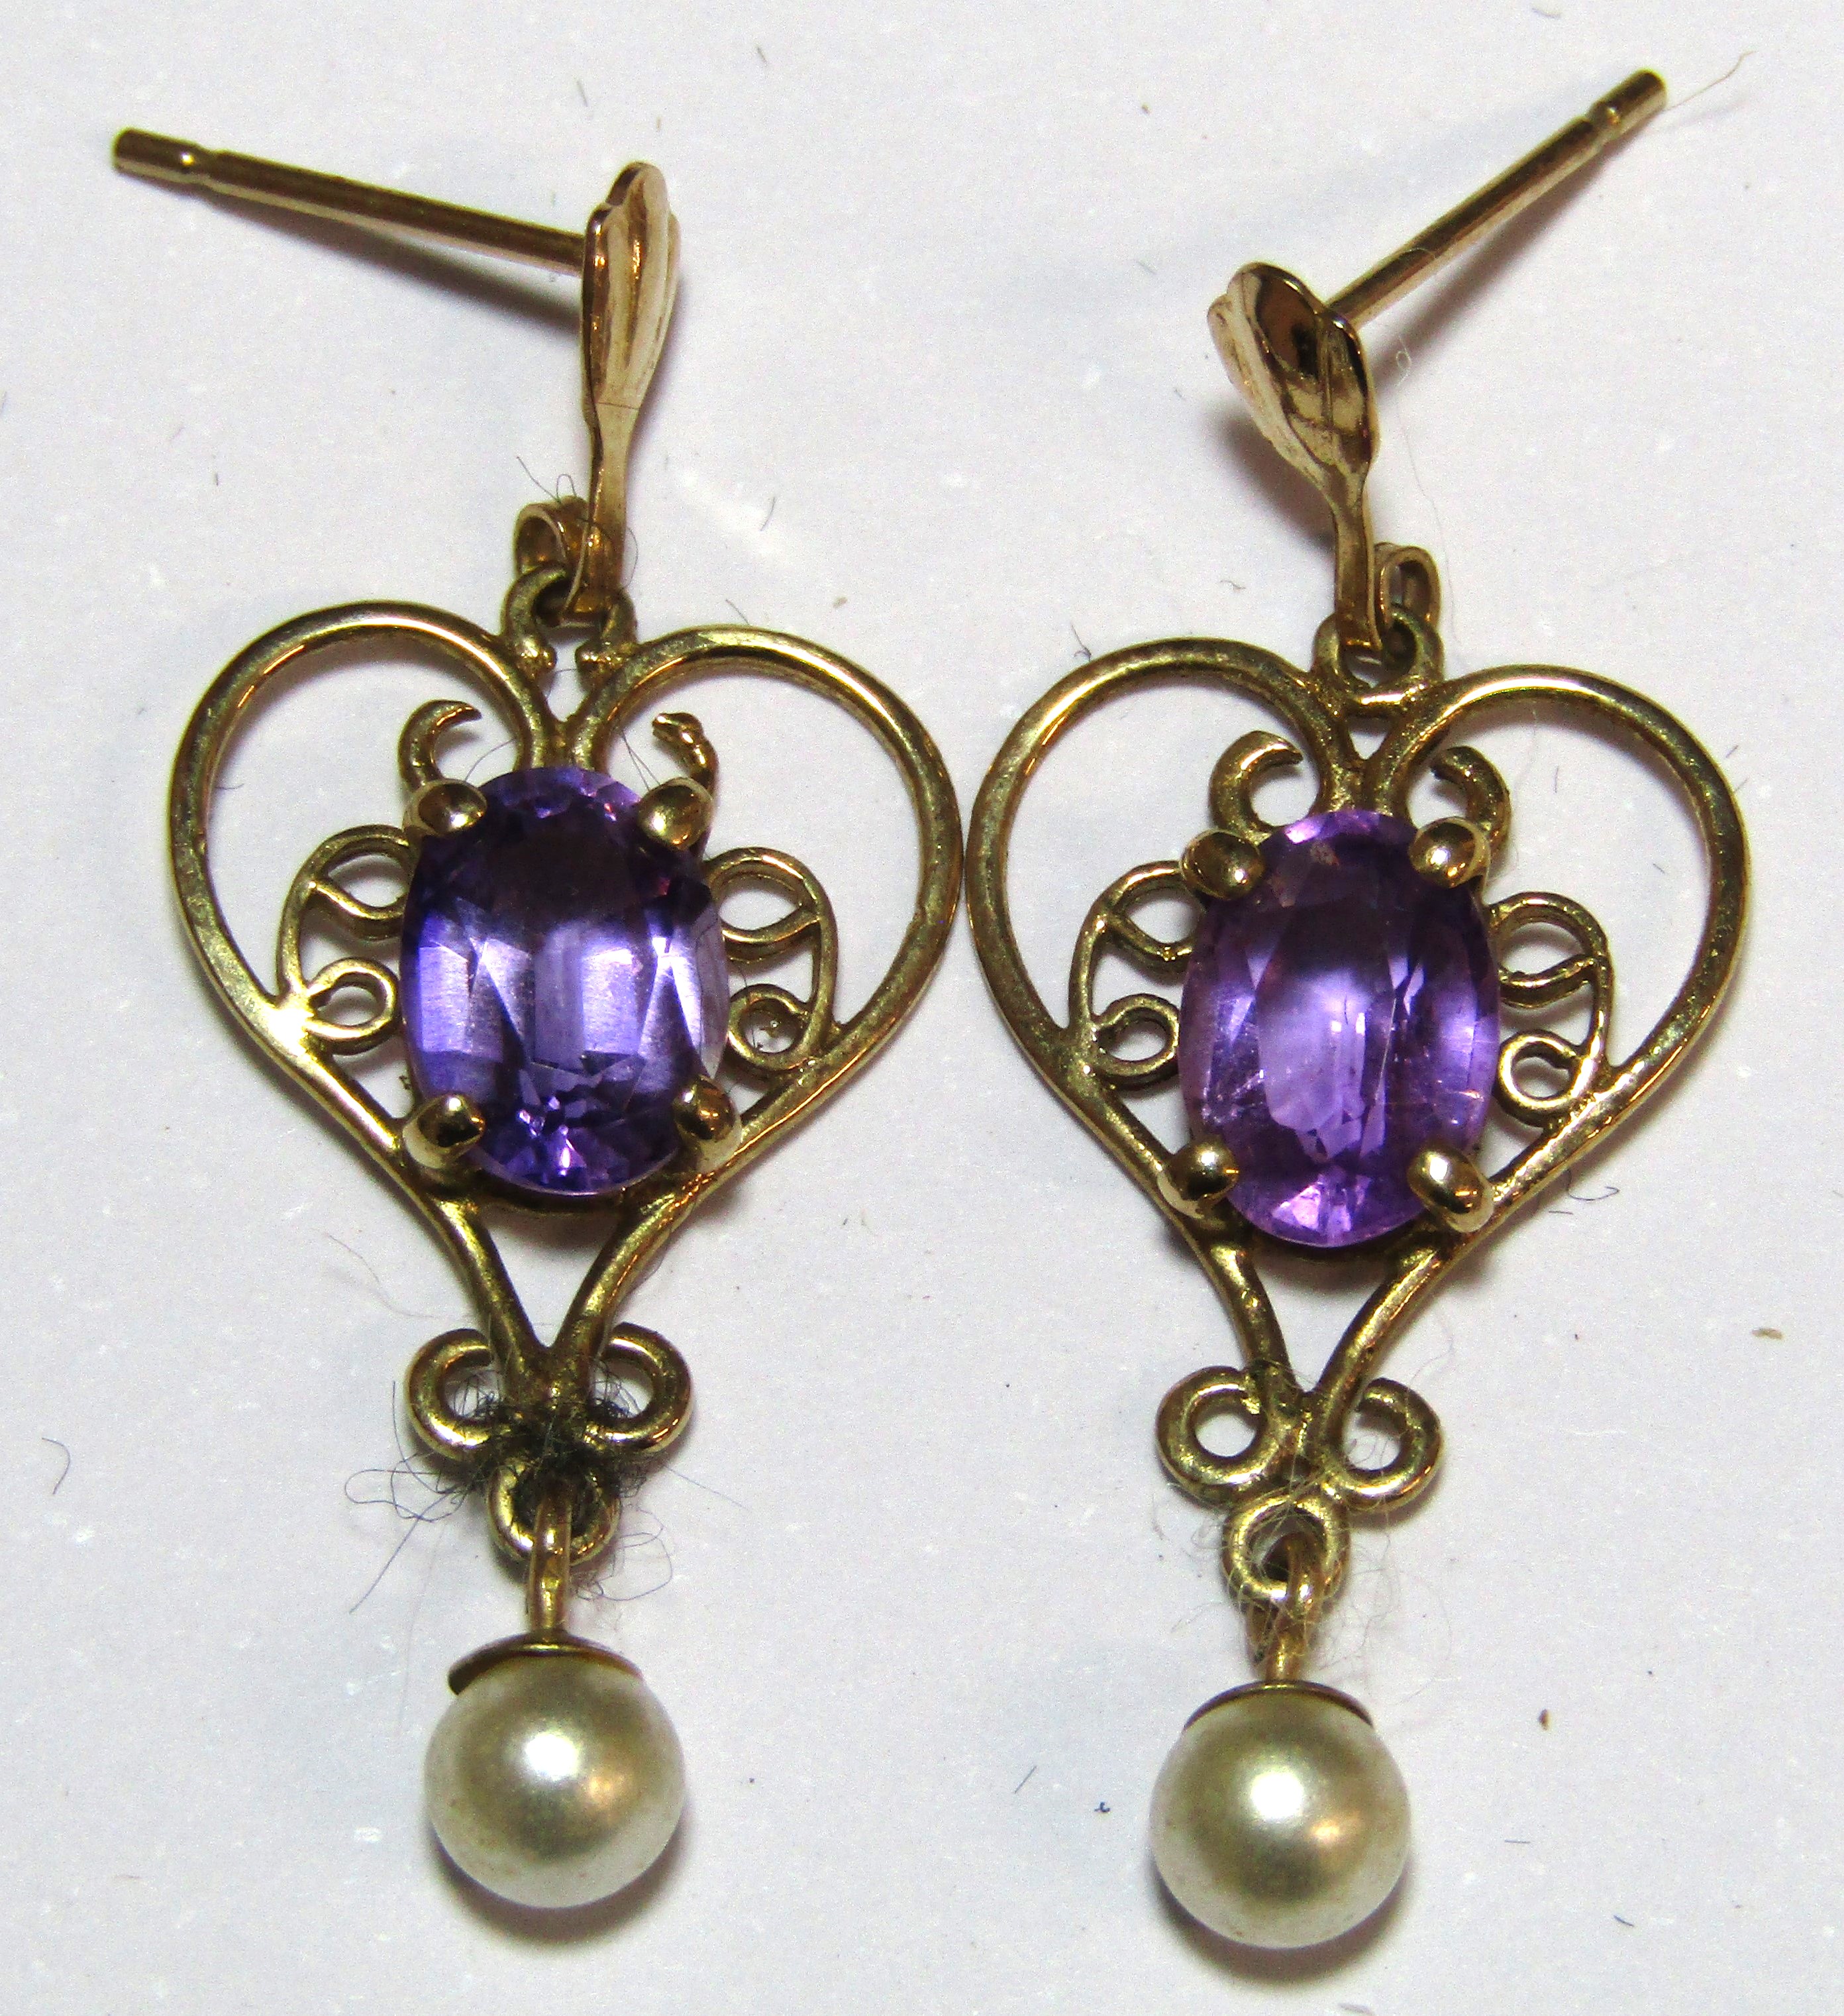 9ct gold pendant with amethyst and diamonds along with amethyst and pearl earrings in yellow - Image 3 of 6